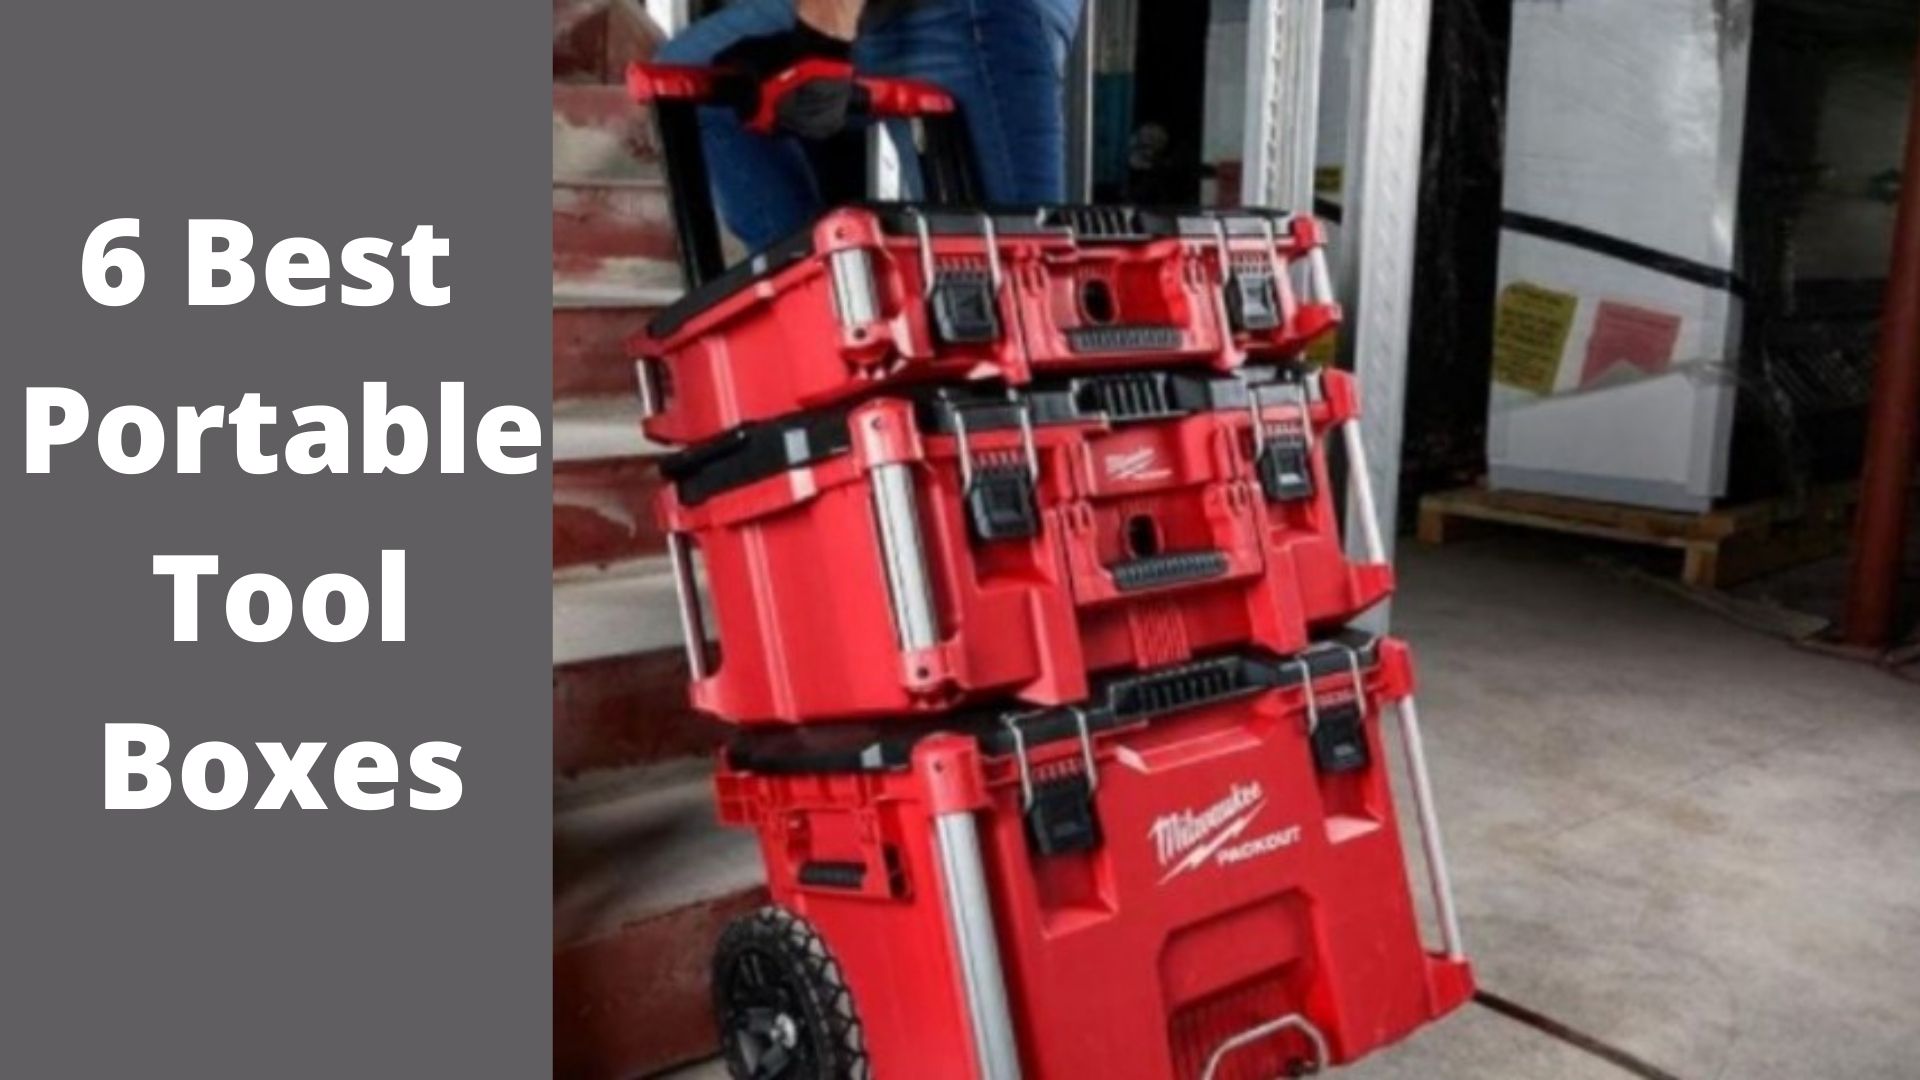 6 Best Portable Tool Boxes (1)